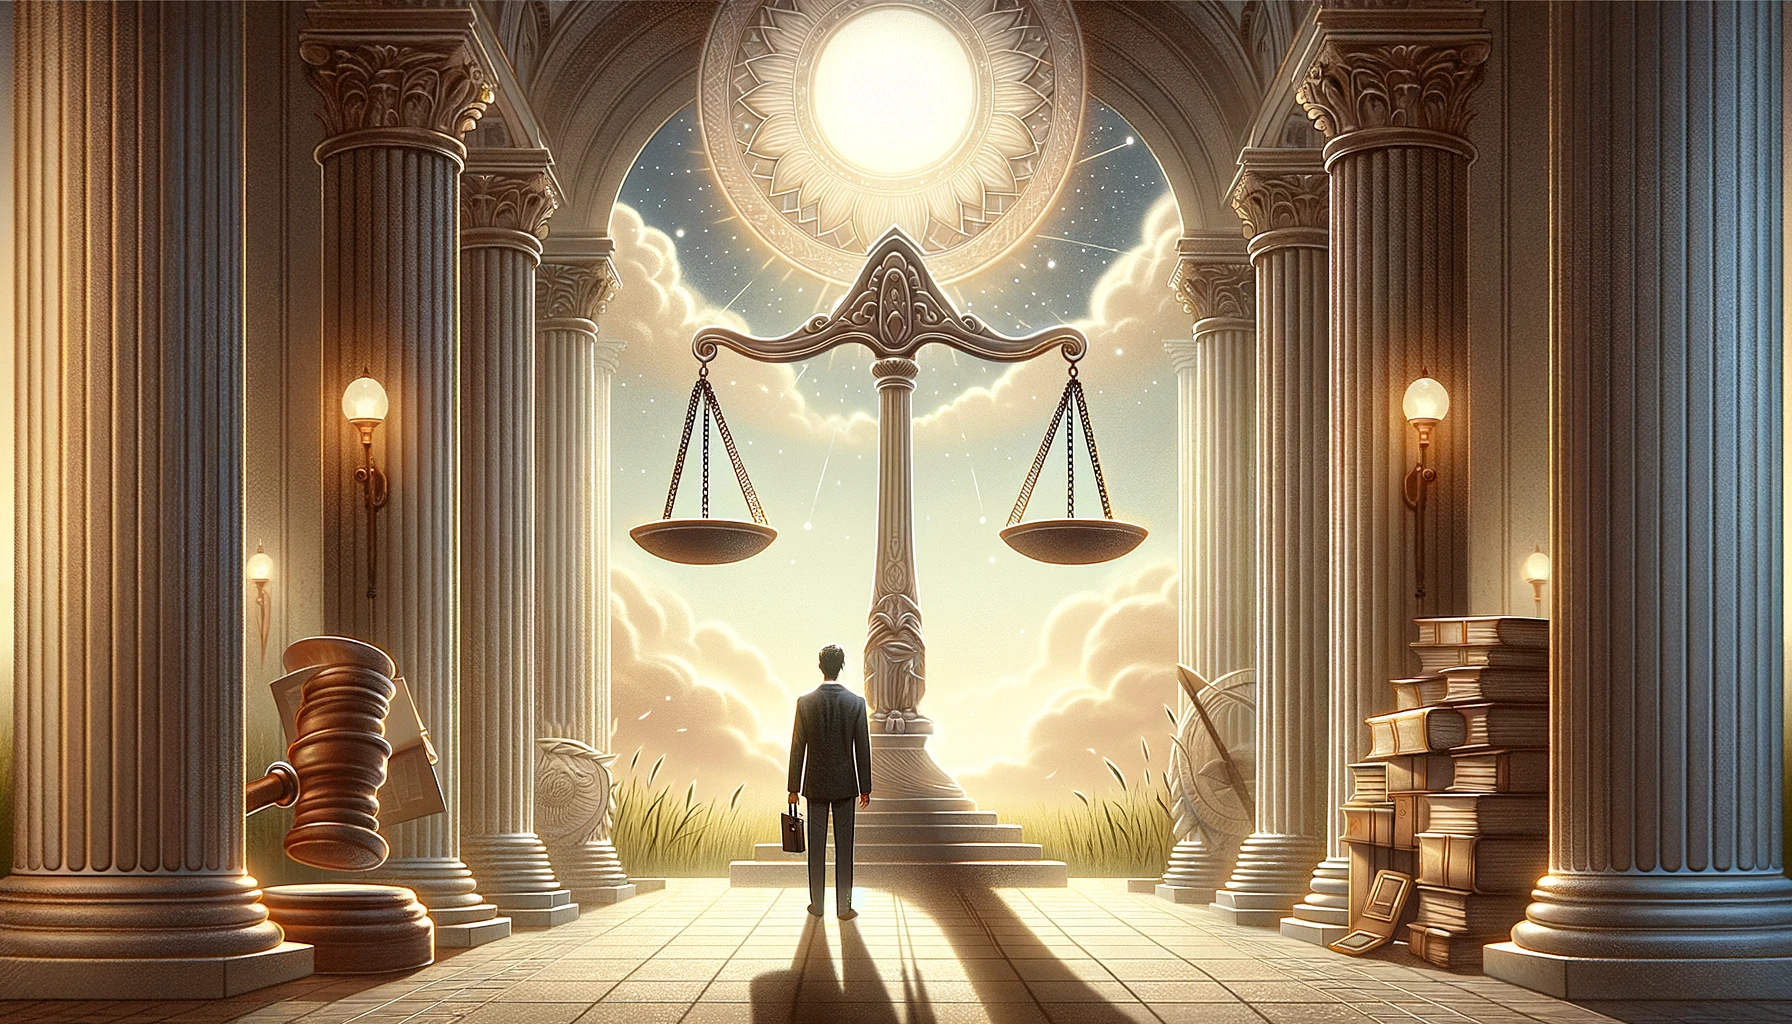 "In this visualization, an individual stands before a perfectly balanced scale, set against a backdrop representing a quest for a just and equitable resolution, enhanced by symbols of order and harmony. The atmosphere of clarity and resolution is conveyed through a color palette that underscores the purity and calmness of achieving fairness, highlighting the individual's hope and determination for balance. Through its imagery, viewers are prompted to contemplate the pursuit of justice and the significance of fairness in decision-making."